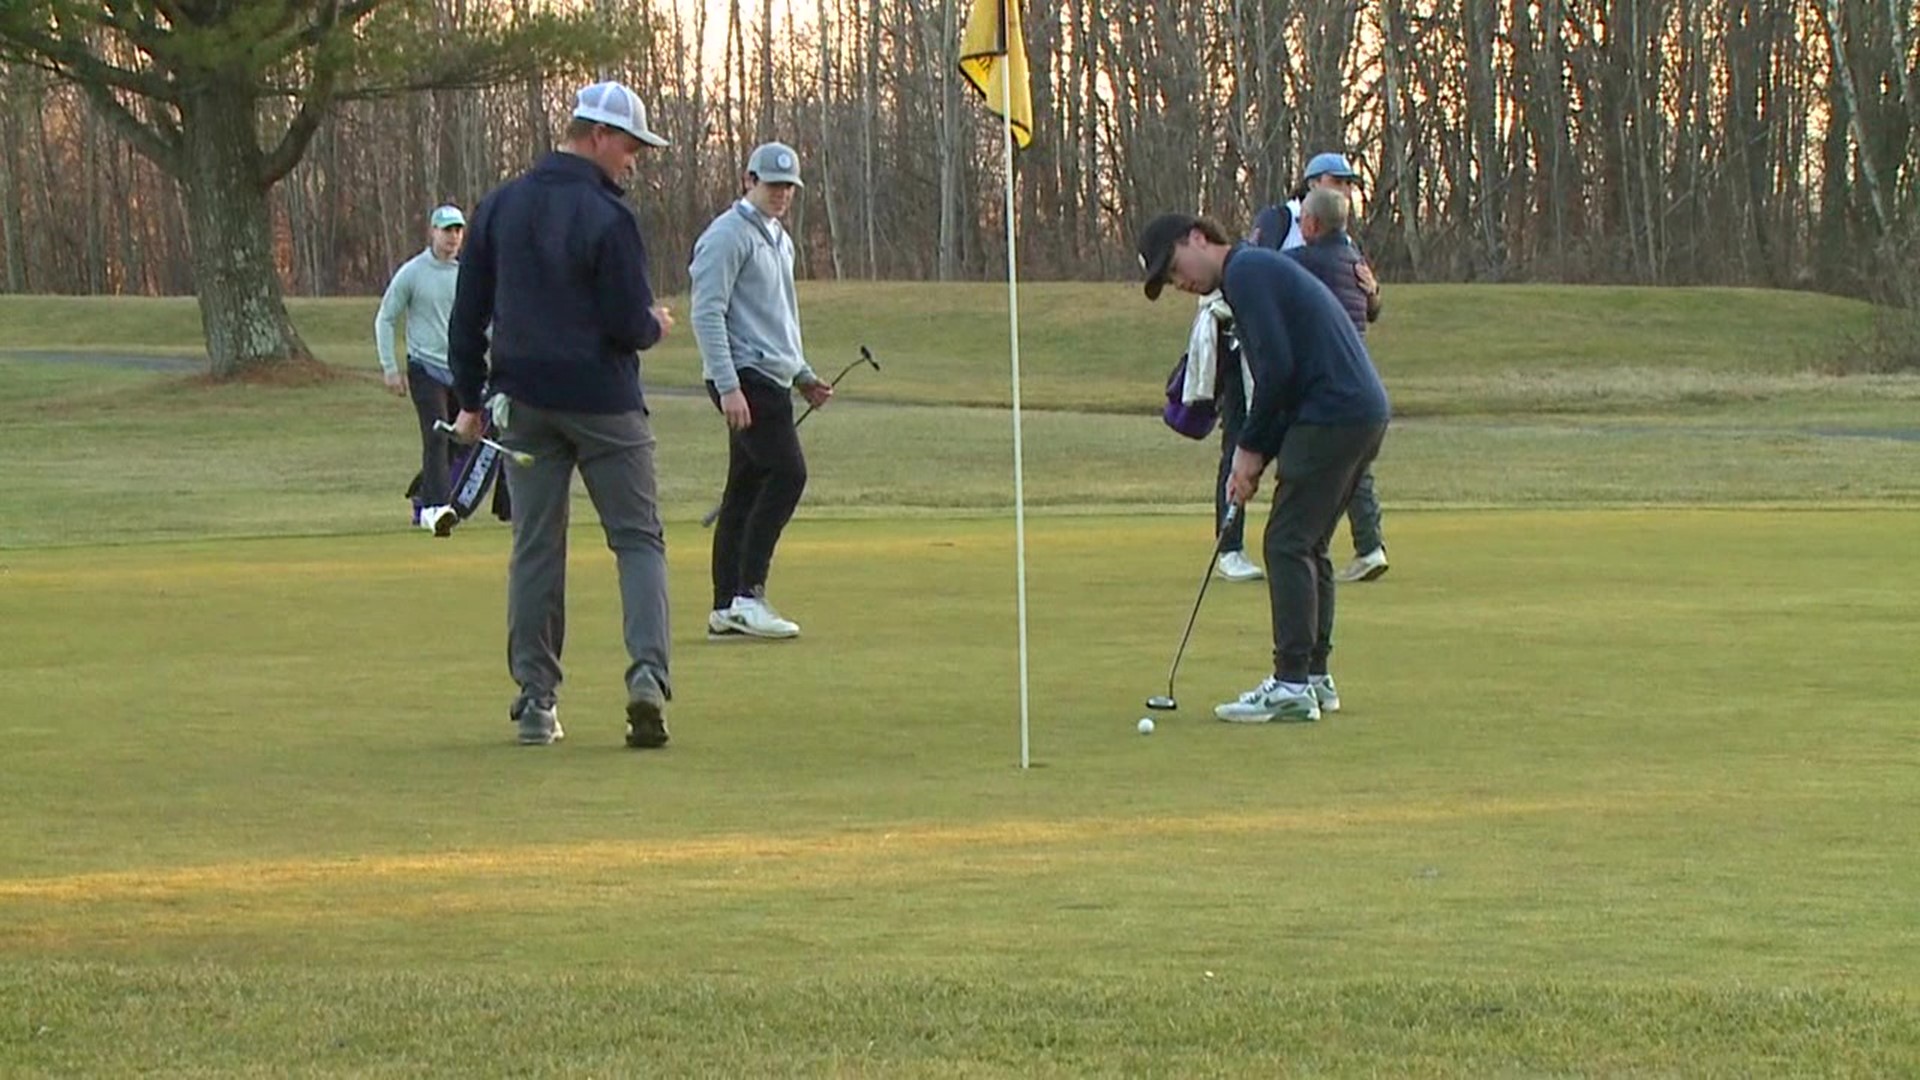 Golfers from all over our area flocked to Pine Hills Country Club to take advantage of some unusually warm weather.